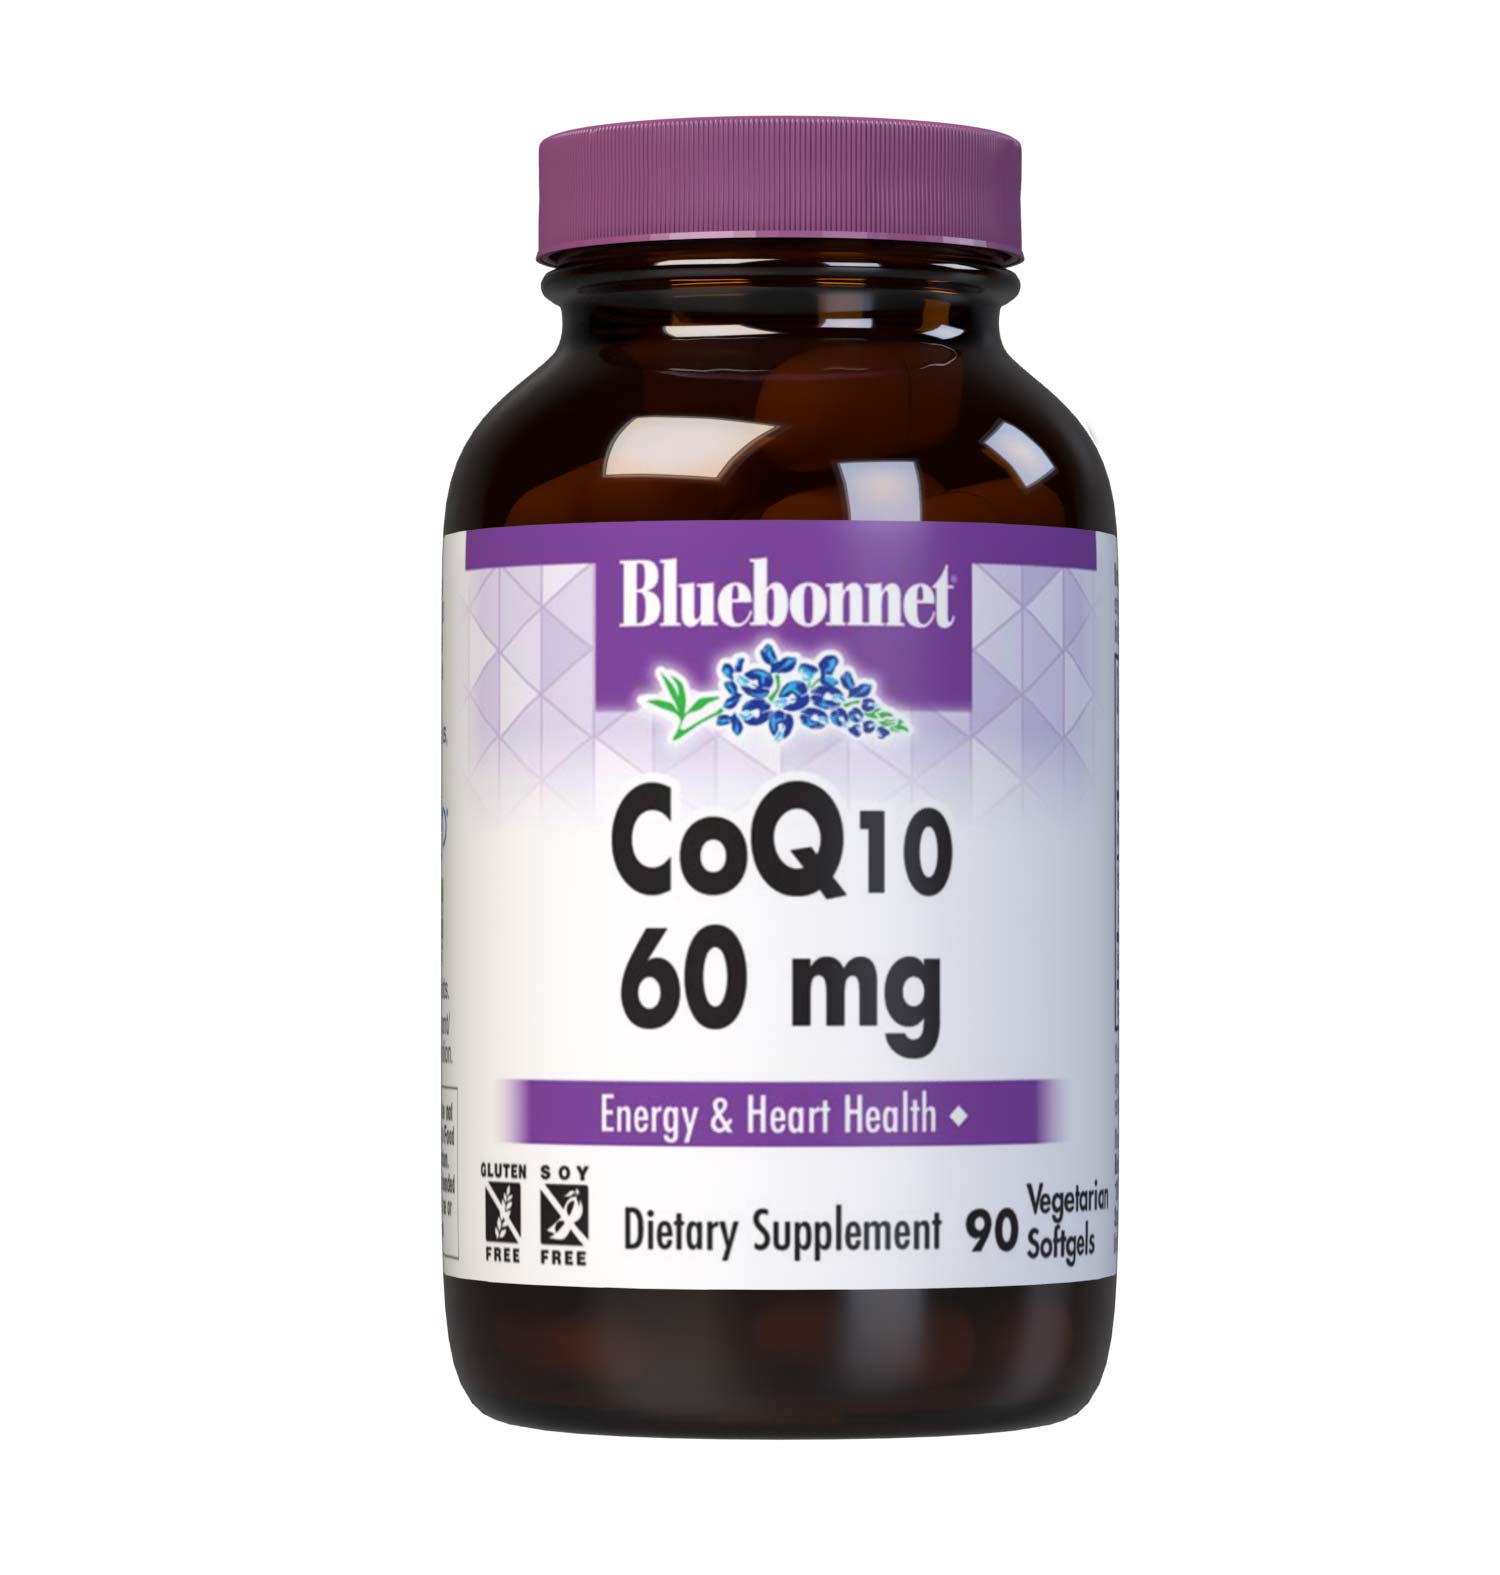 Bluebonnet’s CoQ10 60 mg 90 Vegetarian Softgels are formulated with the “trans-isomer” form of ubiquinone from Kaneka, the world’s largest manufacturer of premium-quality Coenzyme Q-10, in a base of non-GMO sunflower oil plus vitamin E to enhance stability. CoQ10 promotes antioxidant protection and cardiovascular health. #size_90 count